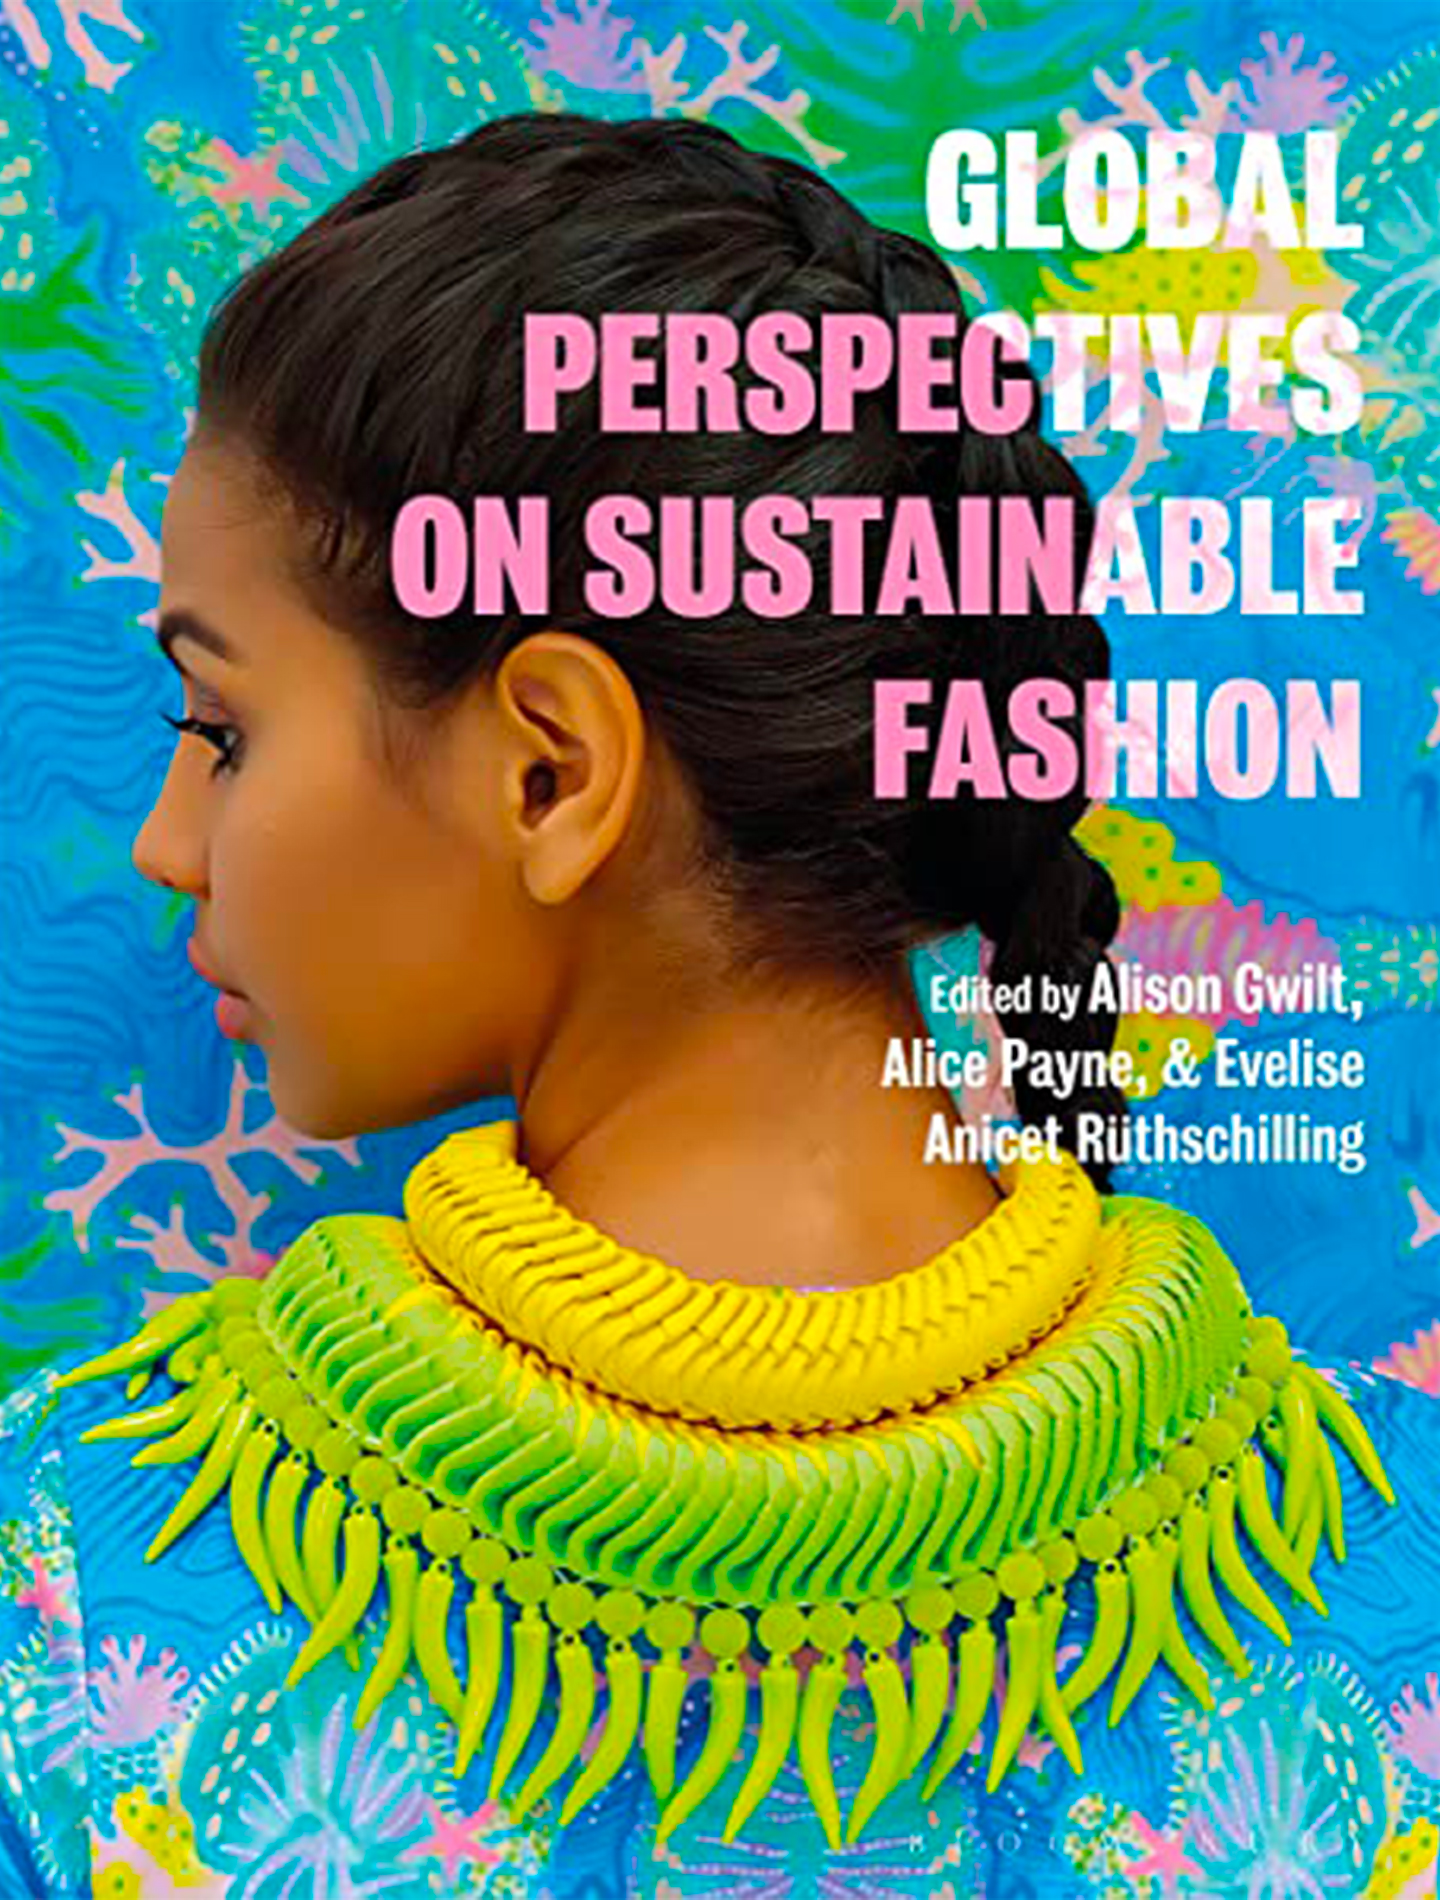 Gwilt, A., Payne, A. and Ruthschilling, E.A. (eds.) (2019) Global perspectives on sustainable fashion. First edition. London: Bloomsbury Visual Arts